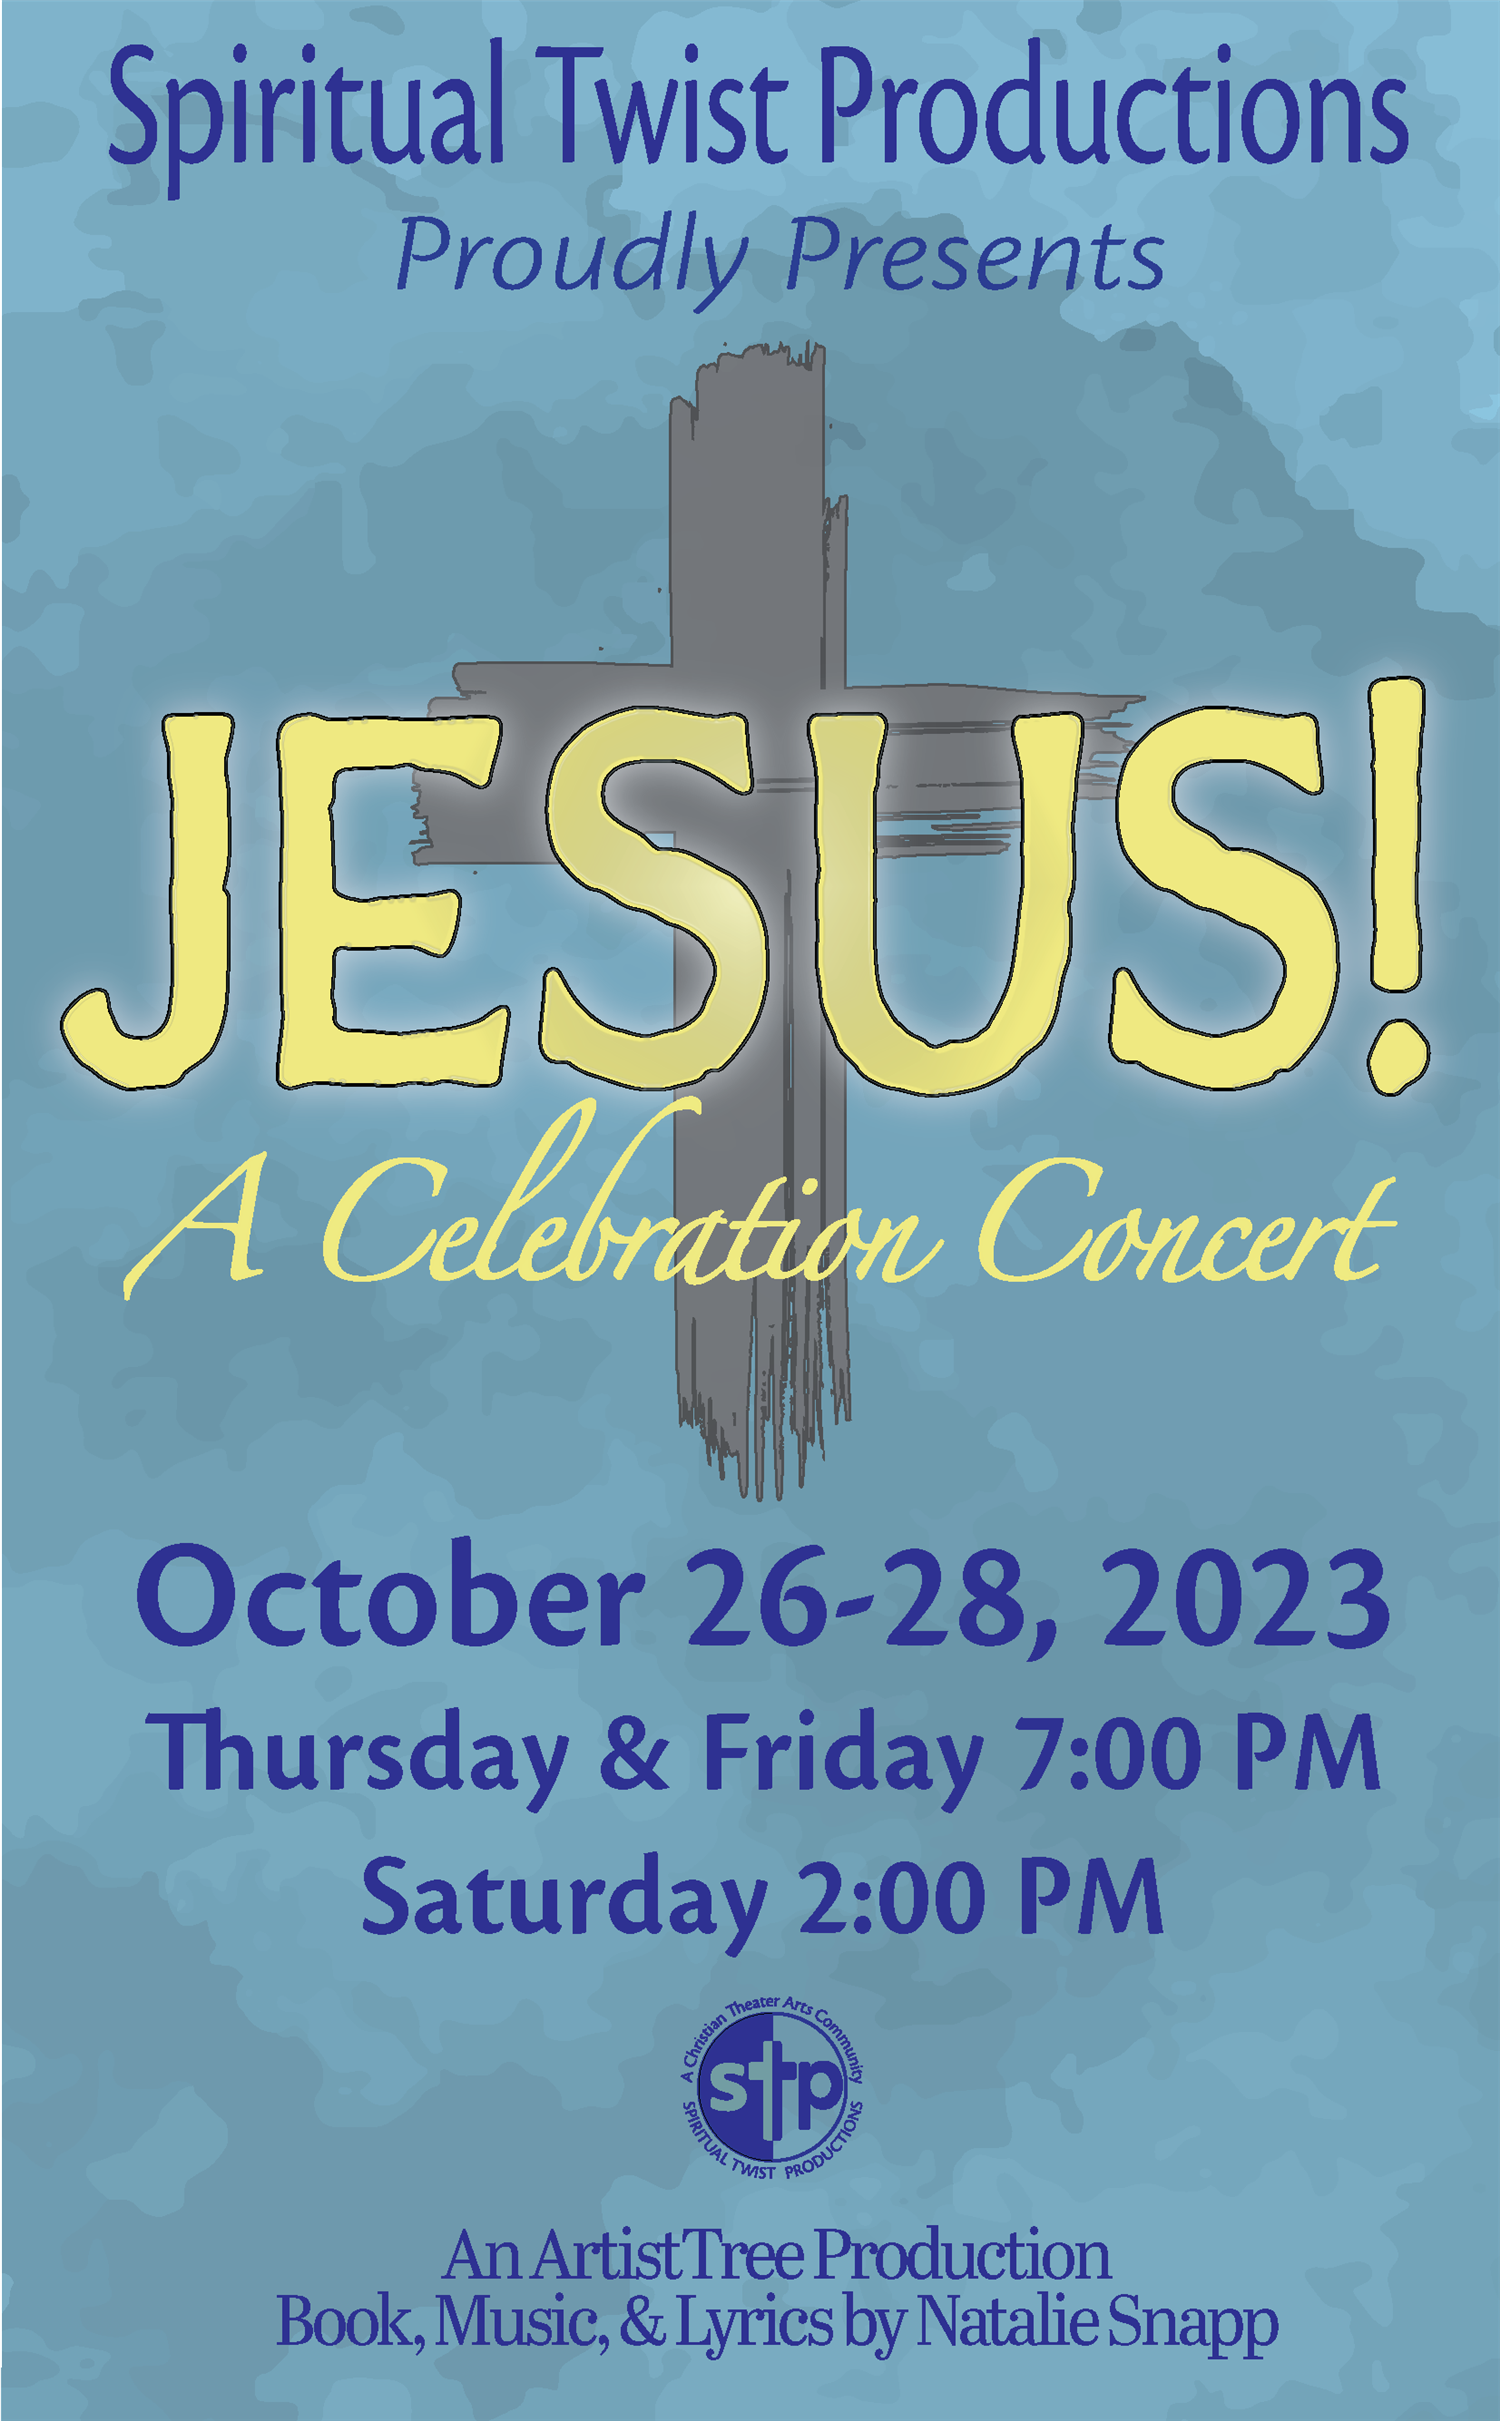 JESUS! A Celebration Concert Saturday, October 28, 2023 @ 2 PM All Tickets $10 each on Oct 28, 14:00@Spiritual Twist Productions - Pick a seat, Buy tickets and Get information on Spiritual Twist Productions tickets.spiritualtwist.com